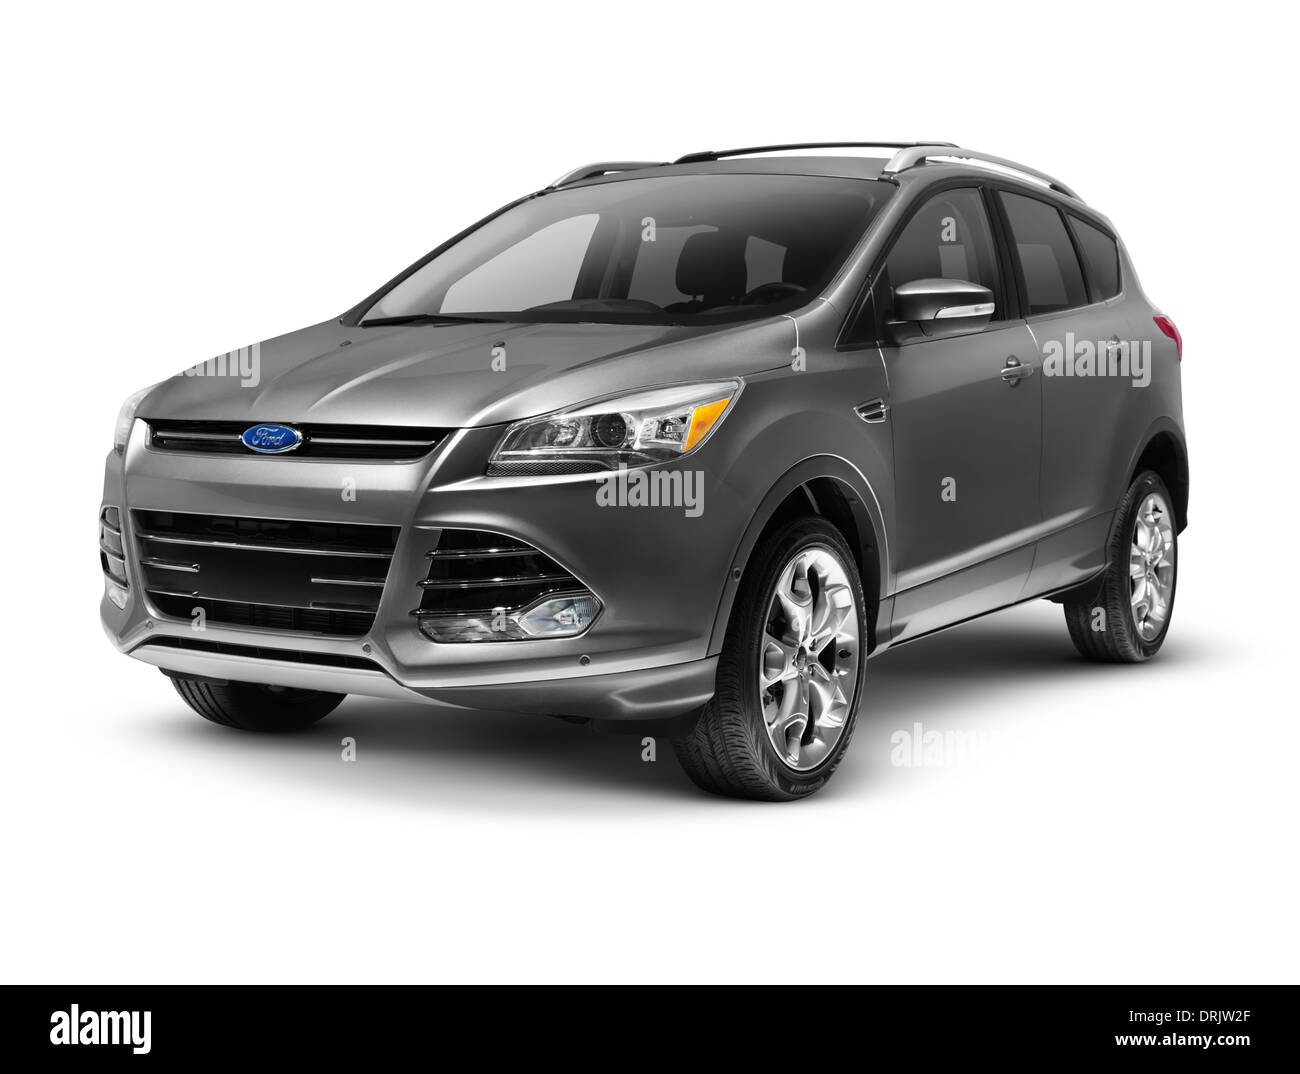 License available at MaximImages.com - Gray 2013 Ford Escape SUV, car isolated on white background with clipping path. Stock Photo